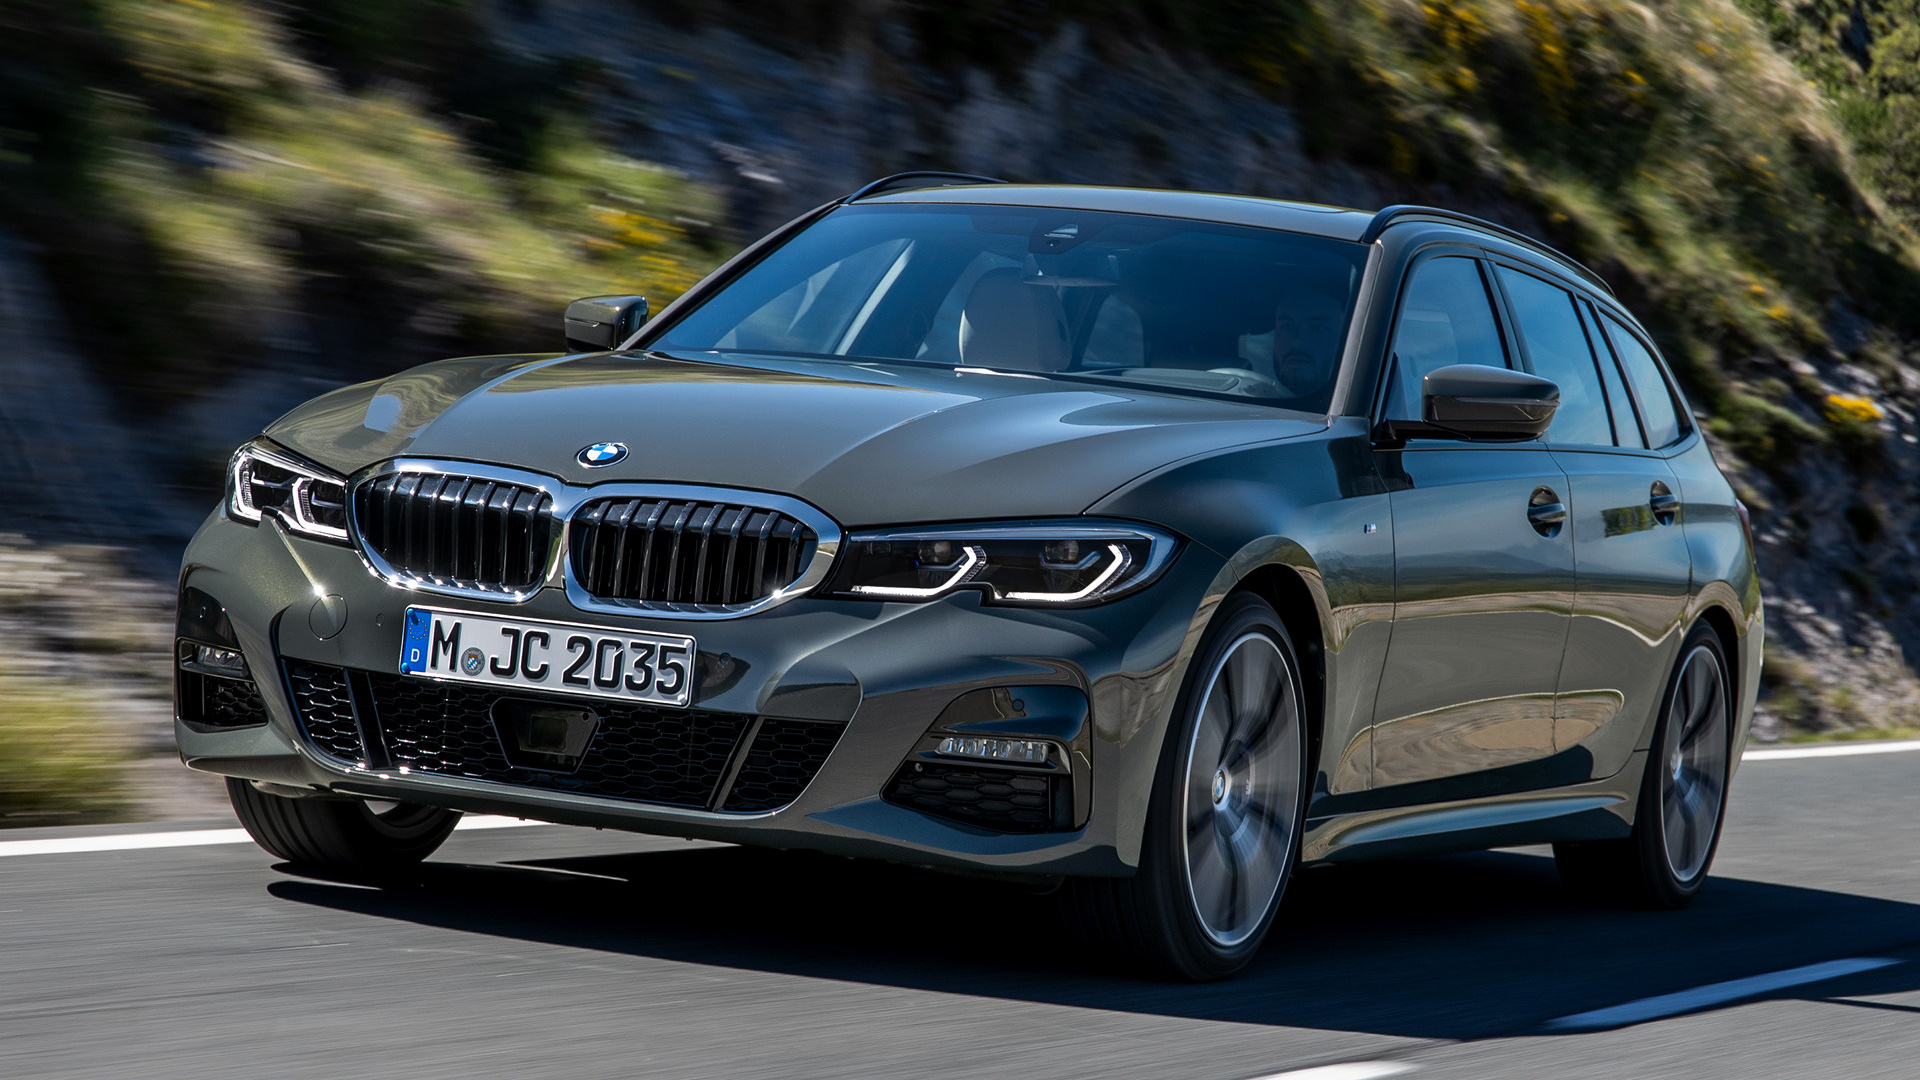 2019 BMW 3 Series Touring M Sport Wallpapers and HD